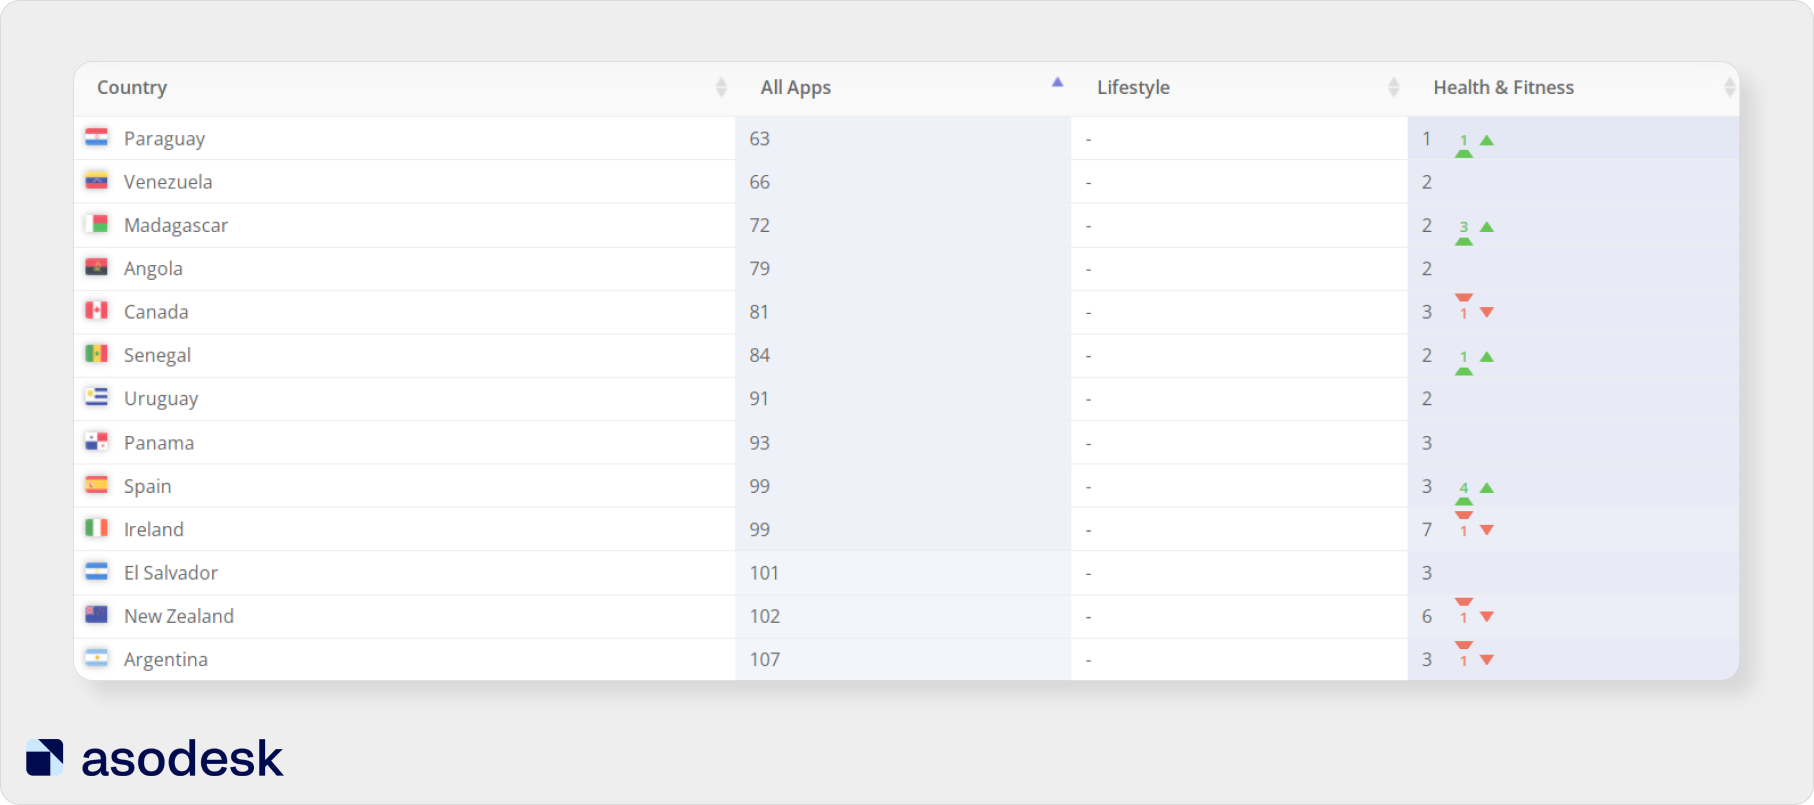 Category Ranking in Asodesk will show the position of the application in the top charts and categories